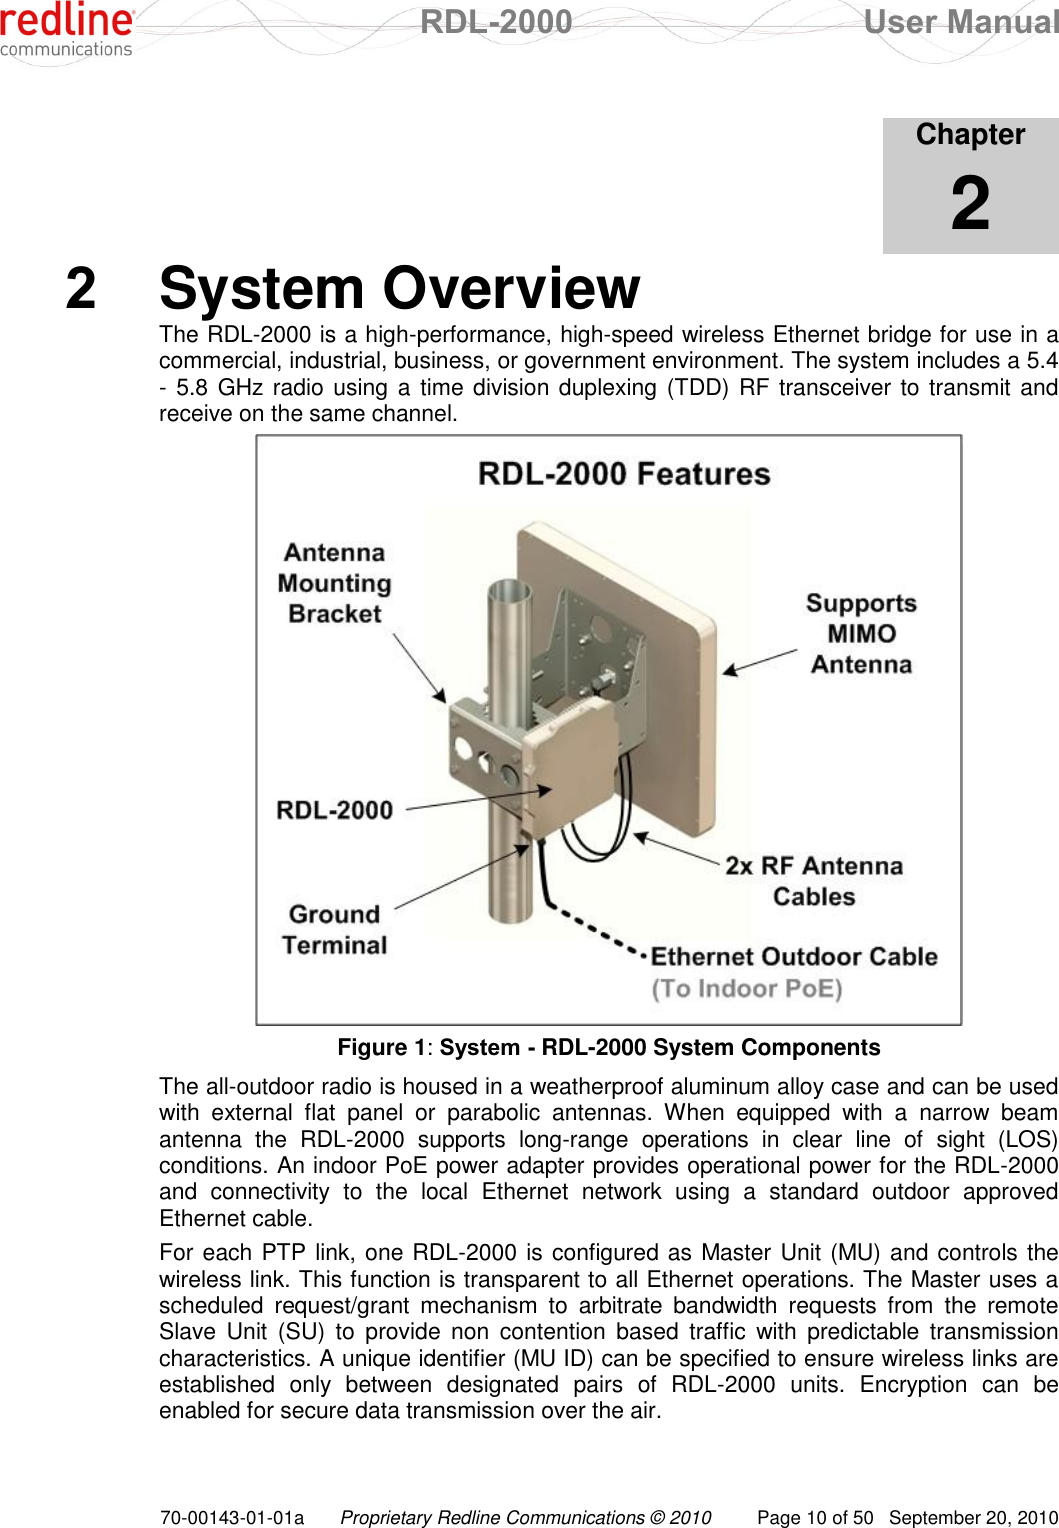  RDL-2000  User Manual 70-00143-01-01a Proprietary Redline Communications © 2010  Page 10 of 50  September 20, 2010            Chapter 2 2  System Overview The RDL-2000 is a high-performance, high-speed wireless Ethernet bridge for use in a commercial, industrial, business, or government environment. The system includes a 5.4 - 5.8  GHz radio using a time division duplexing (TDD) RF transceiver to transmit and receive on the same channel.  Figure 1: System - RDL-2000 System Components The all-outdoor radio is housed in a weatherproof aluminum alloy case and can be used with  external  flat  panel  or  parabolic  antennas.  When  equipped  with  a  narrow  beam antenna  the  RDL-2000  supports  long-range  operations  in  clear  line  of  sight  (LOS) conditions. An indoor PoE power adapter provides operational power for the RDL-2000 and  connectivity  to  the  local  Ethernet  network  using  a  standard  outdoor  approved Ethernet cable. For each PTP link, one RDL-2000 is configured as Master Unit (MU) and controls the wireless link. This function is transparent to all Ethernet operations. The Master uses a scheduled  request/grant  mechanism  to  arbitrate  bandwidth  requests  from  the  remote Slave  Unit  (SU)  to  provide  non  contention  based  traffic  with  predictable  transmission characteristics. A unique identifier (MU ID) can be specified to ensure wireless links are established  only  between  designated  pairs  of  RDL-2000  units.  Encryption  can  be enabled for secure data transmission over the air. 